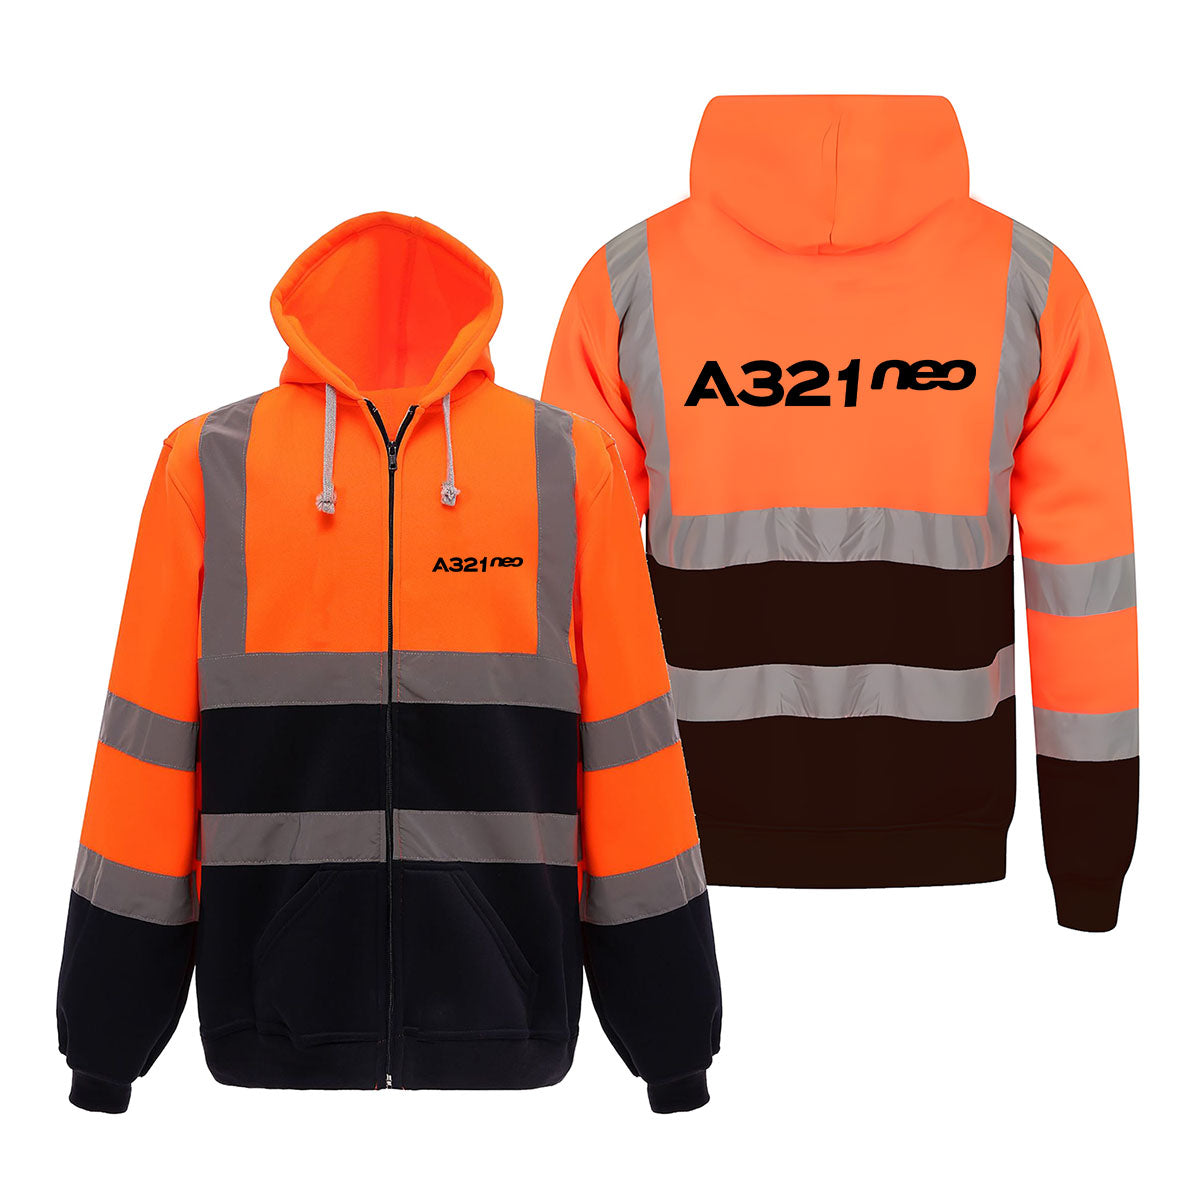 A321neo & Text Designed Reflective Zipped Hoodies